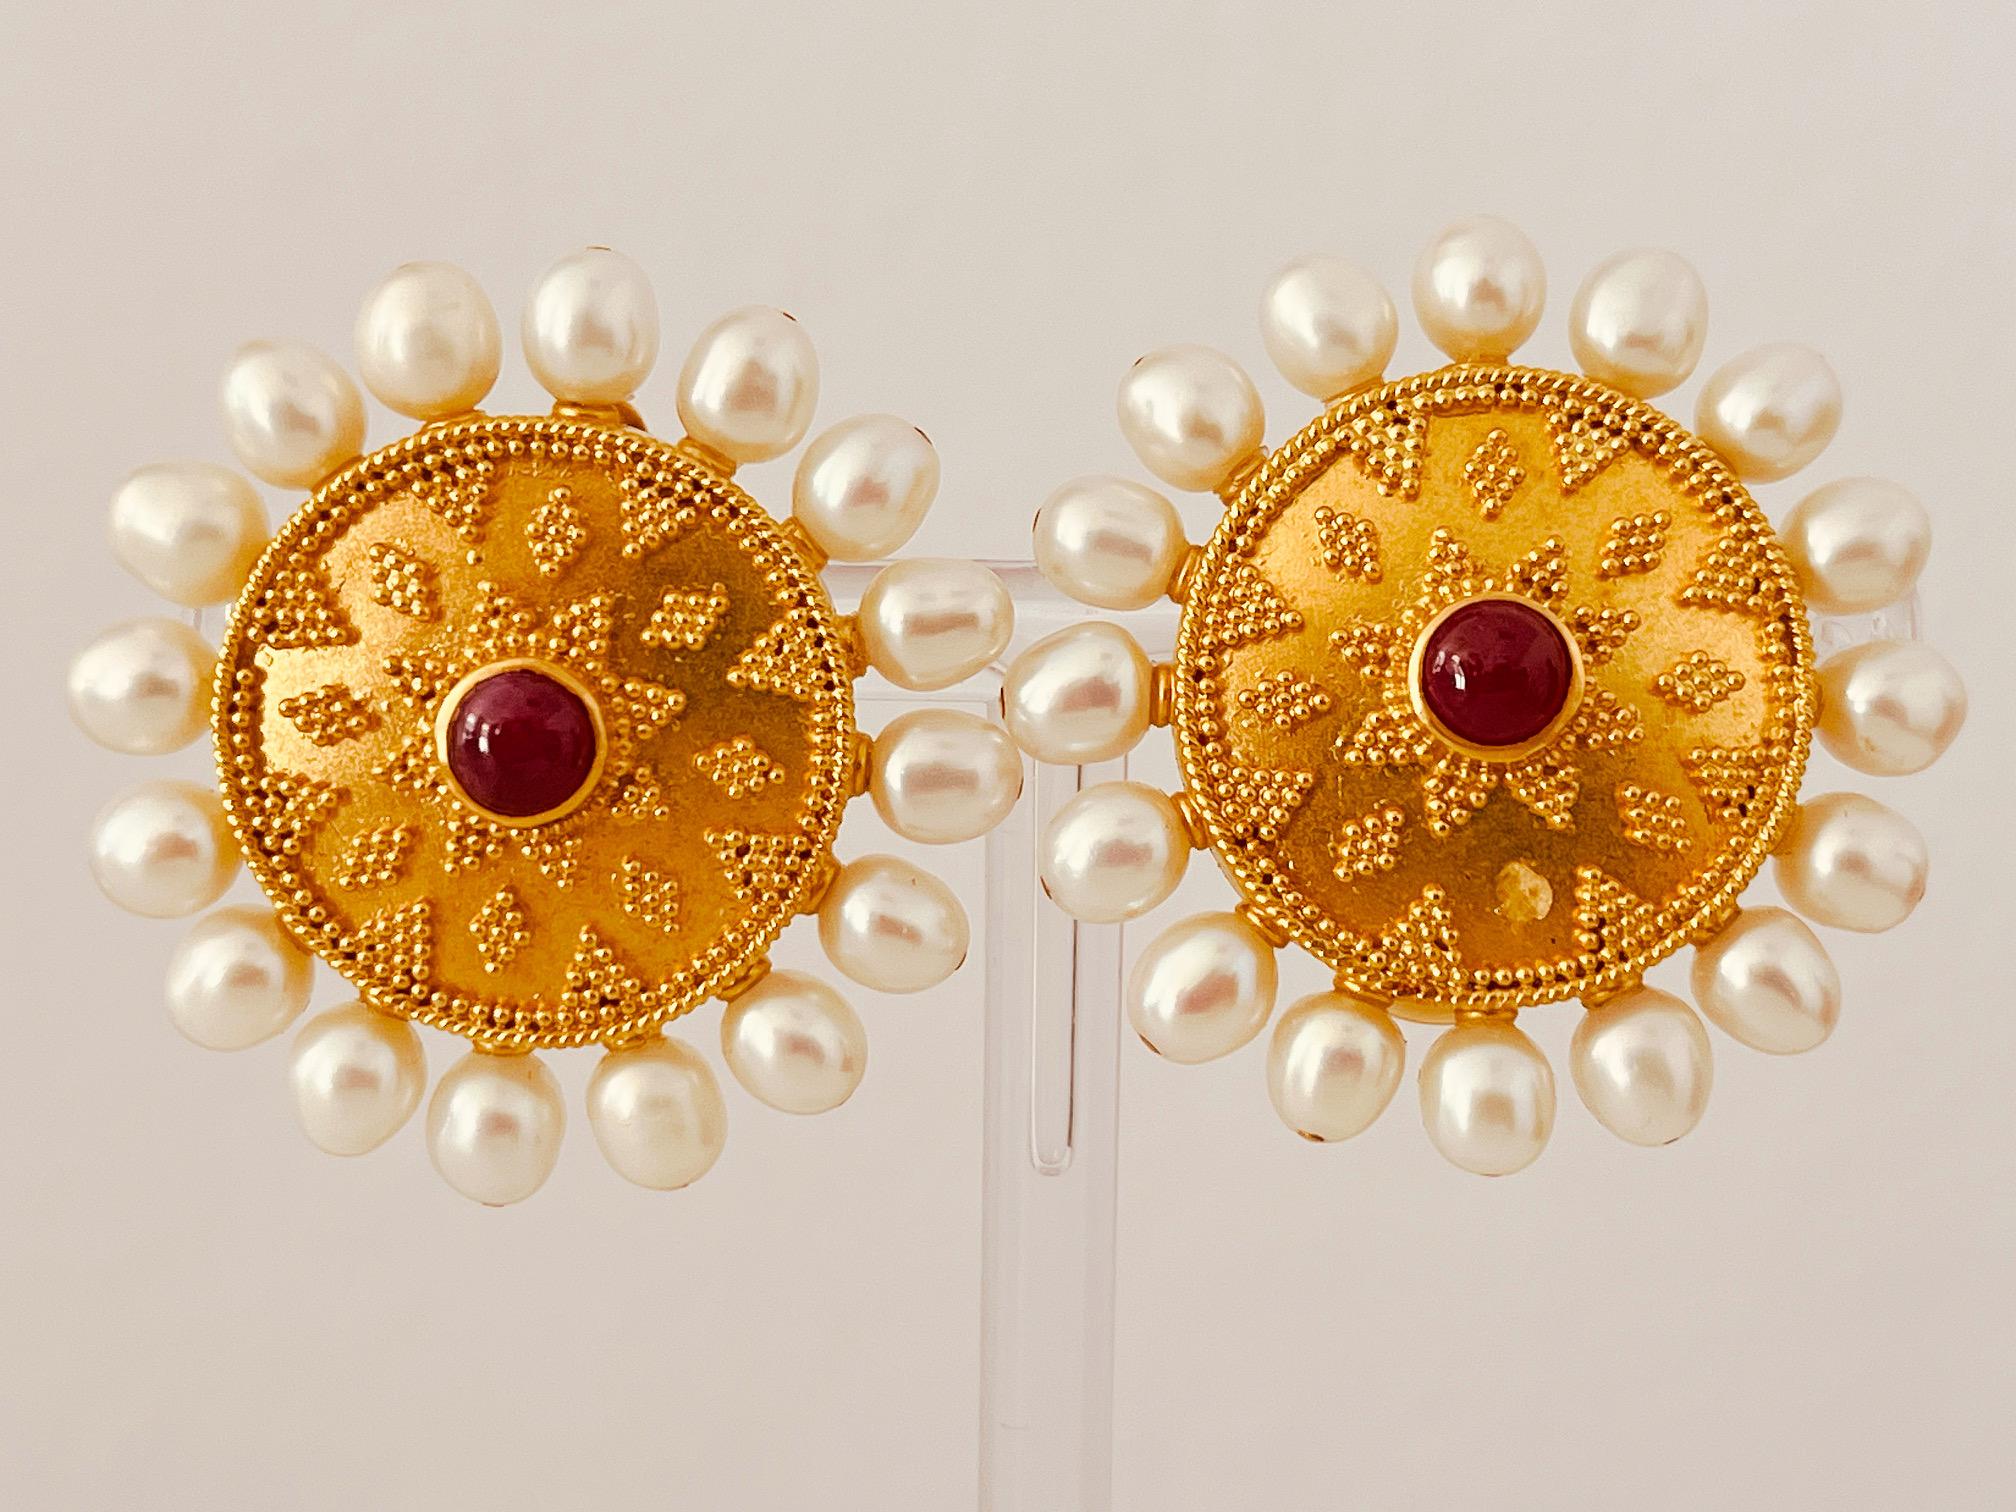 A pair of 22ct yellow gold, granulated disc earrings, centrally set with a cabochon ruby and surrounded by freshwater cultured pearls. Circa 1990. Diameter 3.3cm. 25.4 grams. Both earrings with maker's marks and signed 